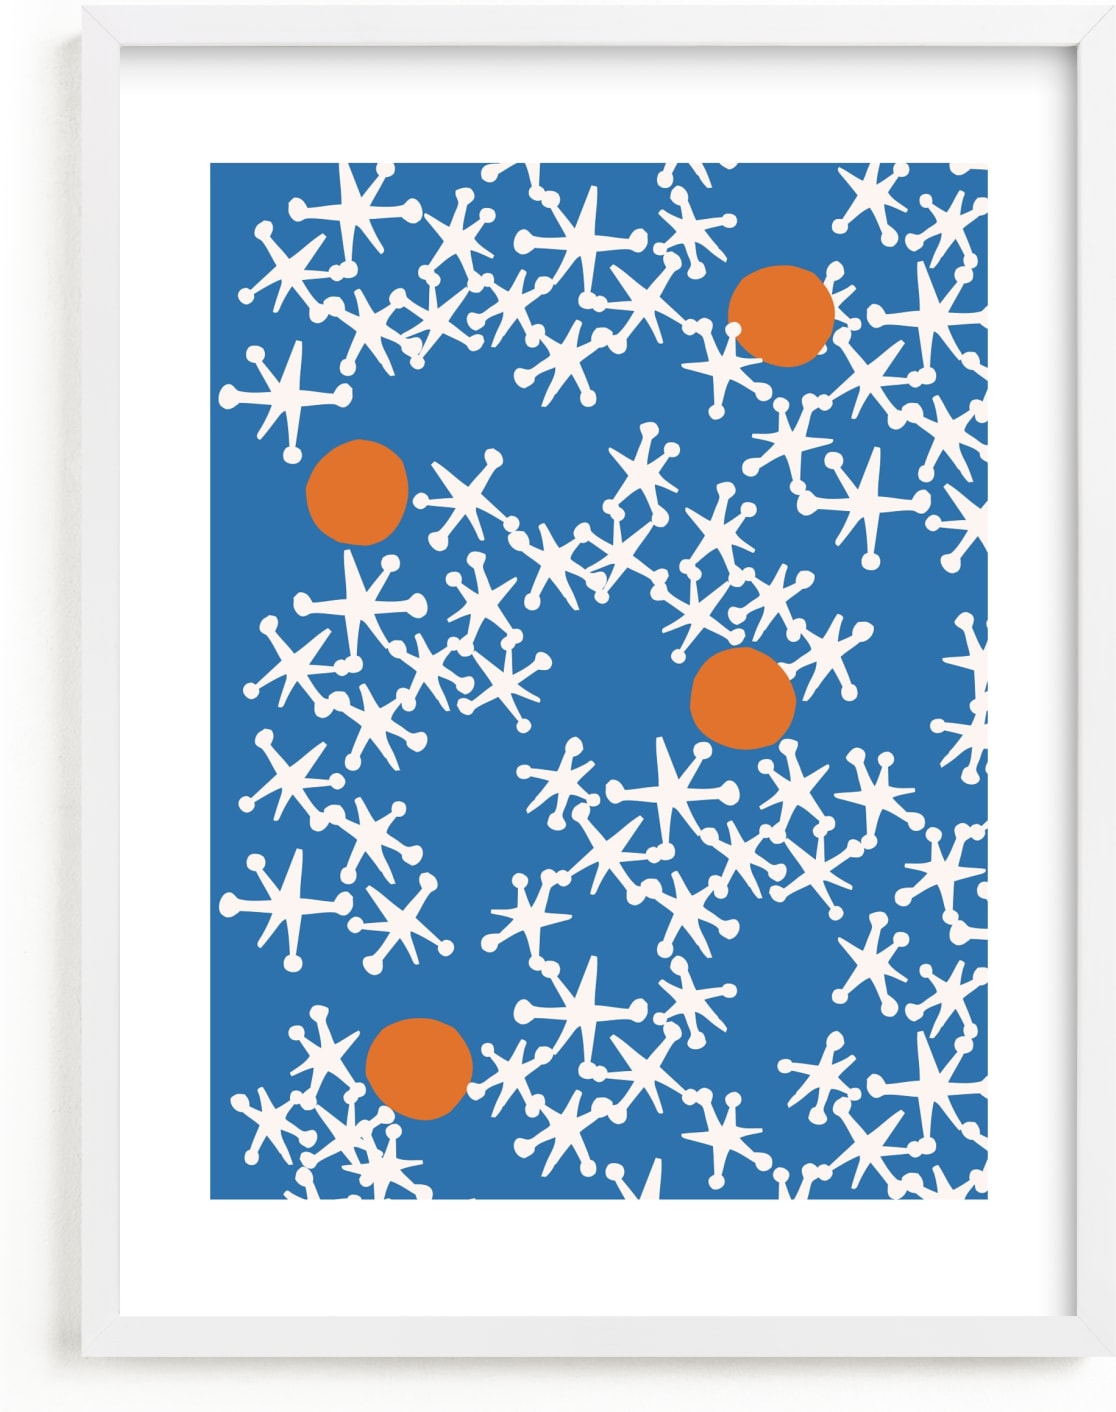 This is a blue, orange, red kids wall art by Ampersand Design Studio called Fun & Games III.